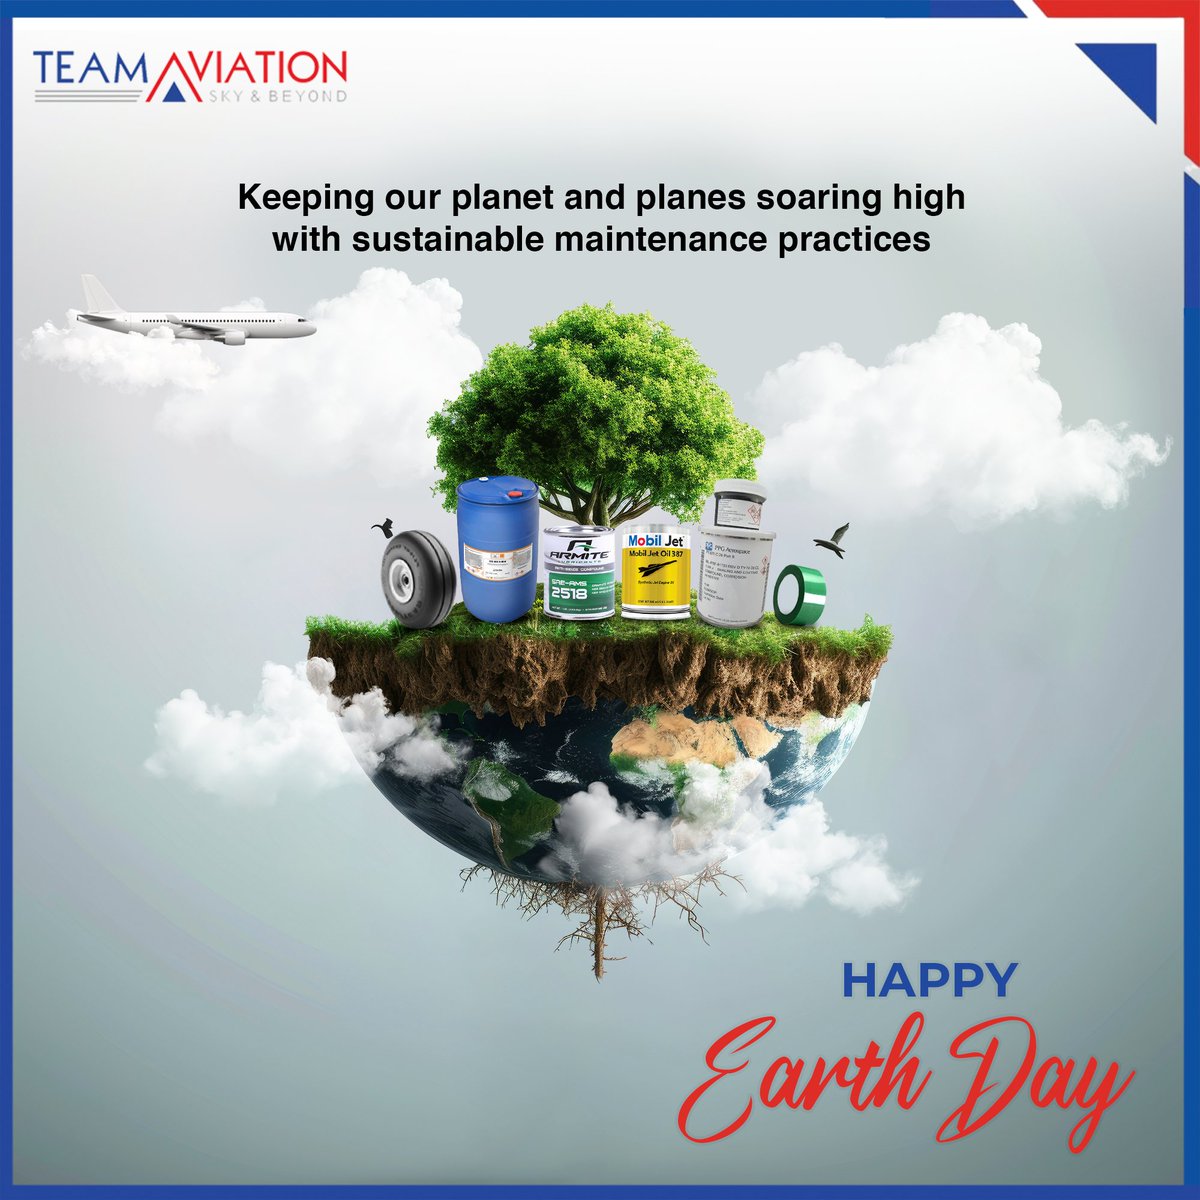 Every part counts in our commitment to a greener future for aviation.

Happy Earth Day! 🌱✈️

Let's keep flying sustainably. 

#earthday #sustainableaircraftmaintenance #greenaviation #newdelhi #aviationinnewdelhi #aviationconsumables #aviationparts #teamaviation